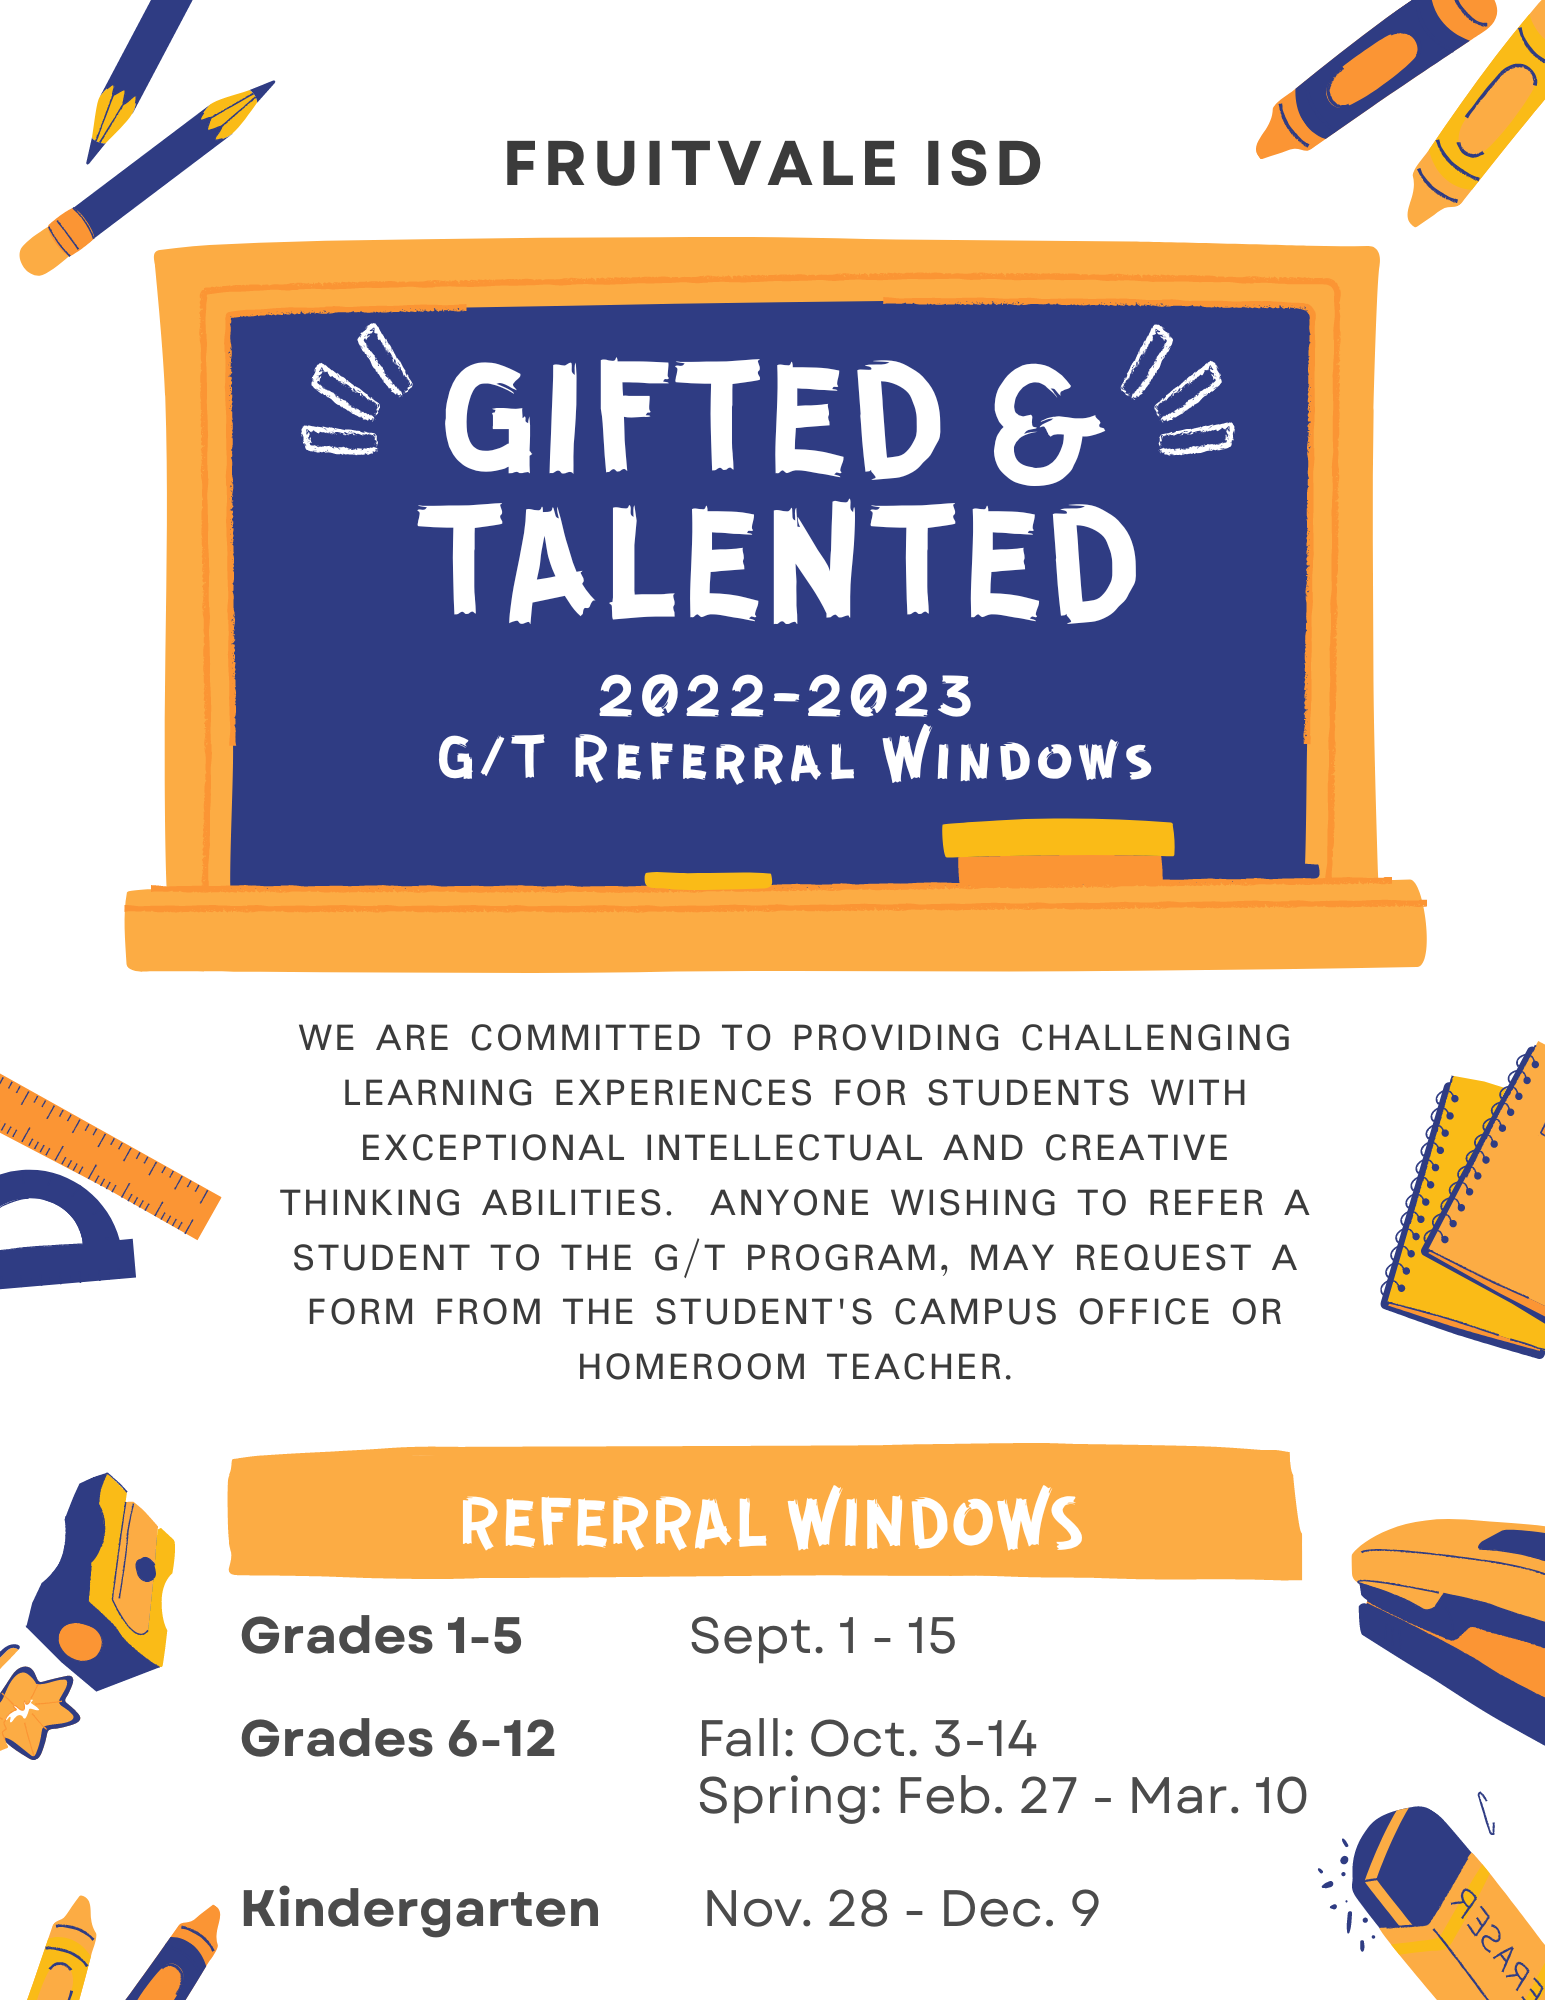 Gifted & Talented Referrals